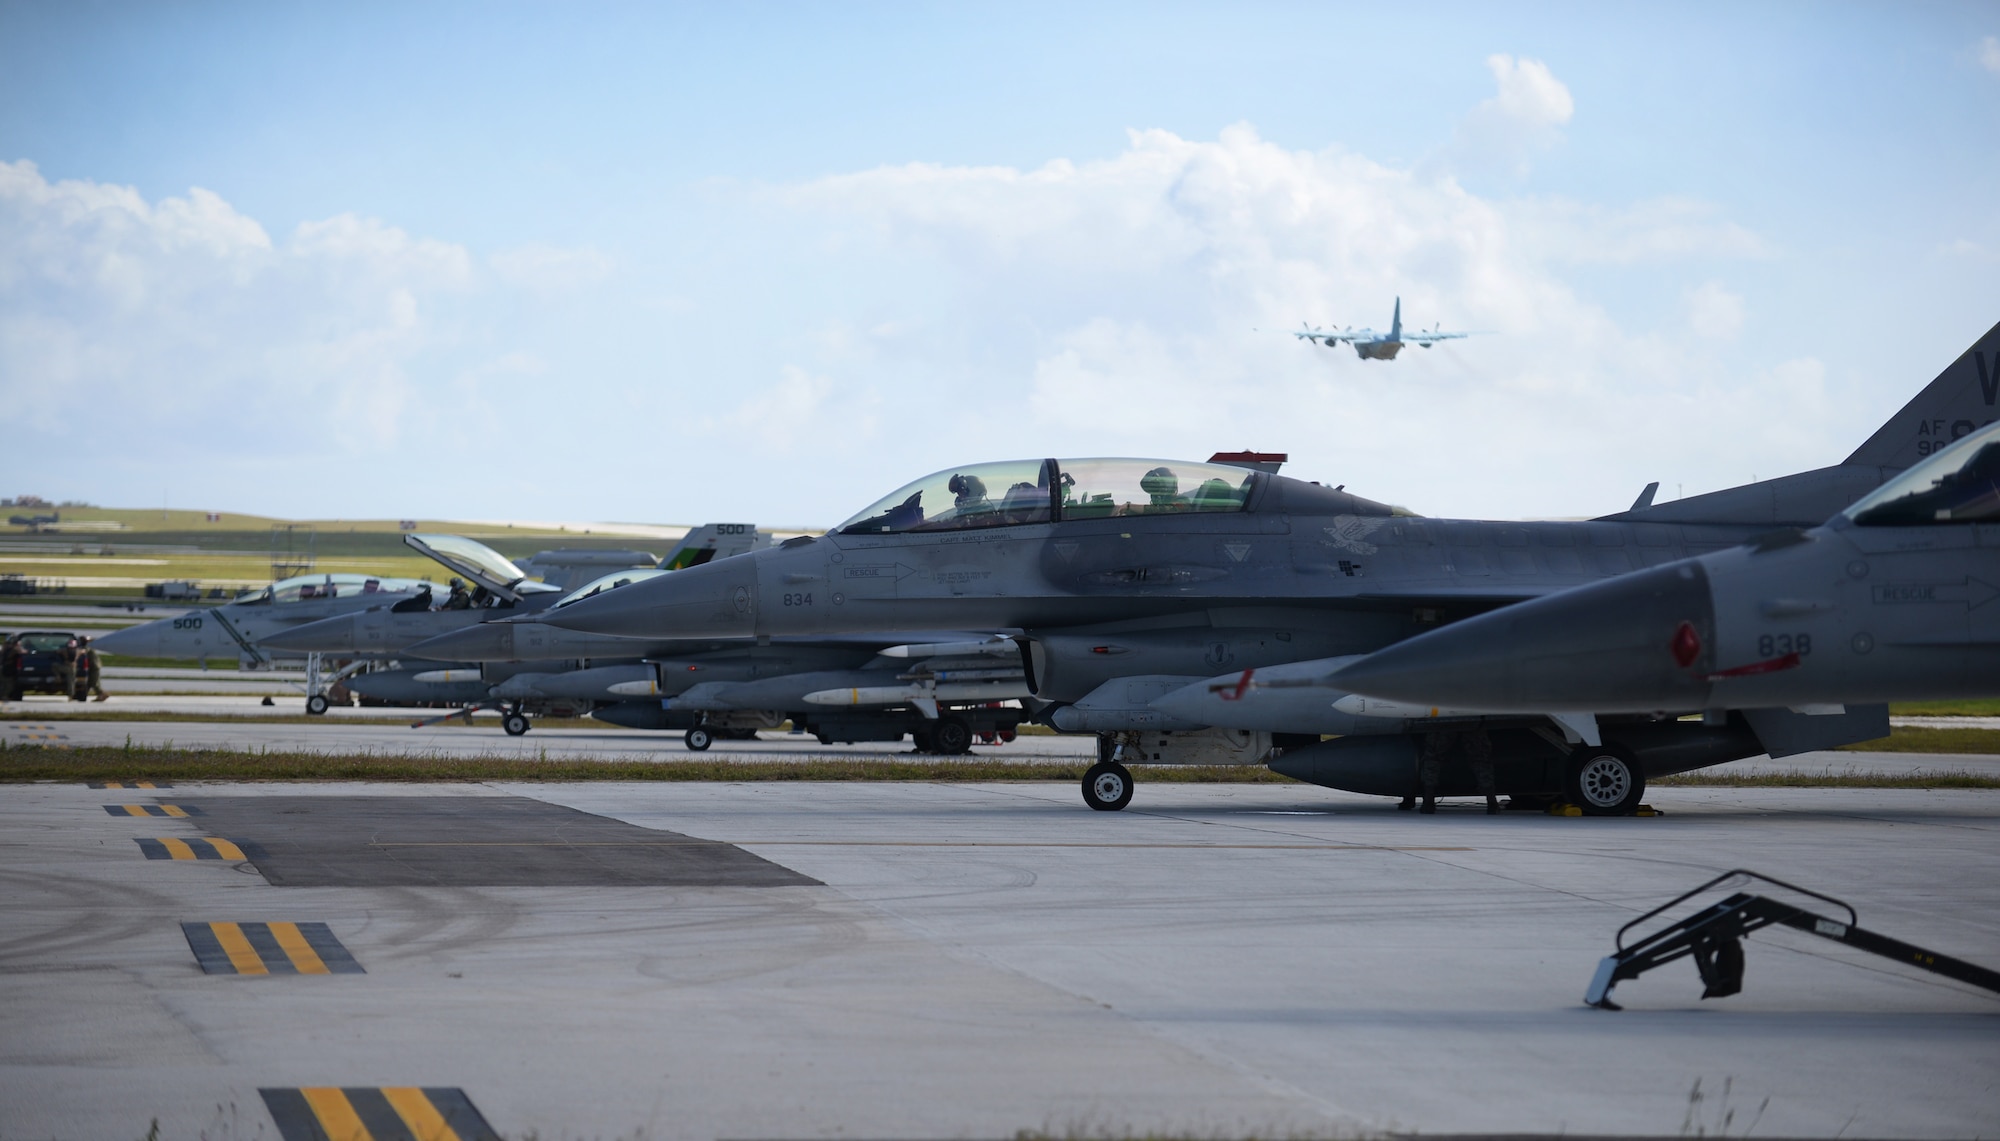 F-16 Fighting Falcons assigned to the 13th Fighter Squadron, Misawa Air Base, Japan, lineup on the flightline in preparation for a mission Feb. 4, 2016, at Andersen Air Force Base, Guam. Several F-16 Fighting Falcons from the 13th FS are deployed to Andersen AFB in support of Cope North 2016. Cope North’s large force employment training with allies strengthens free access to the global commons by enhancing air superiority, interdiction, electronic warfare, tactical airlift and aerial refueling. (U.S. Air Force photo/Senior Airman Joshua Smoot)